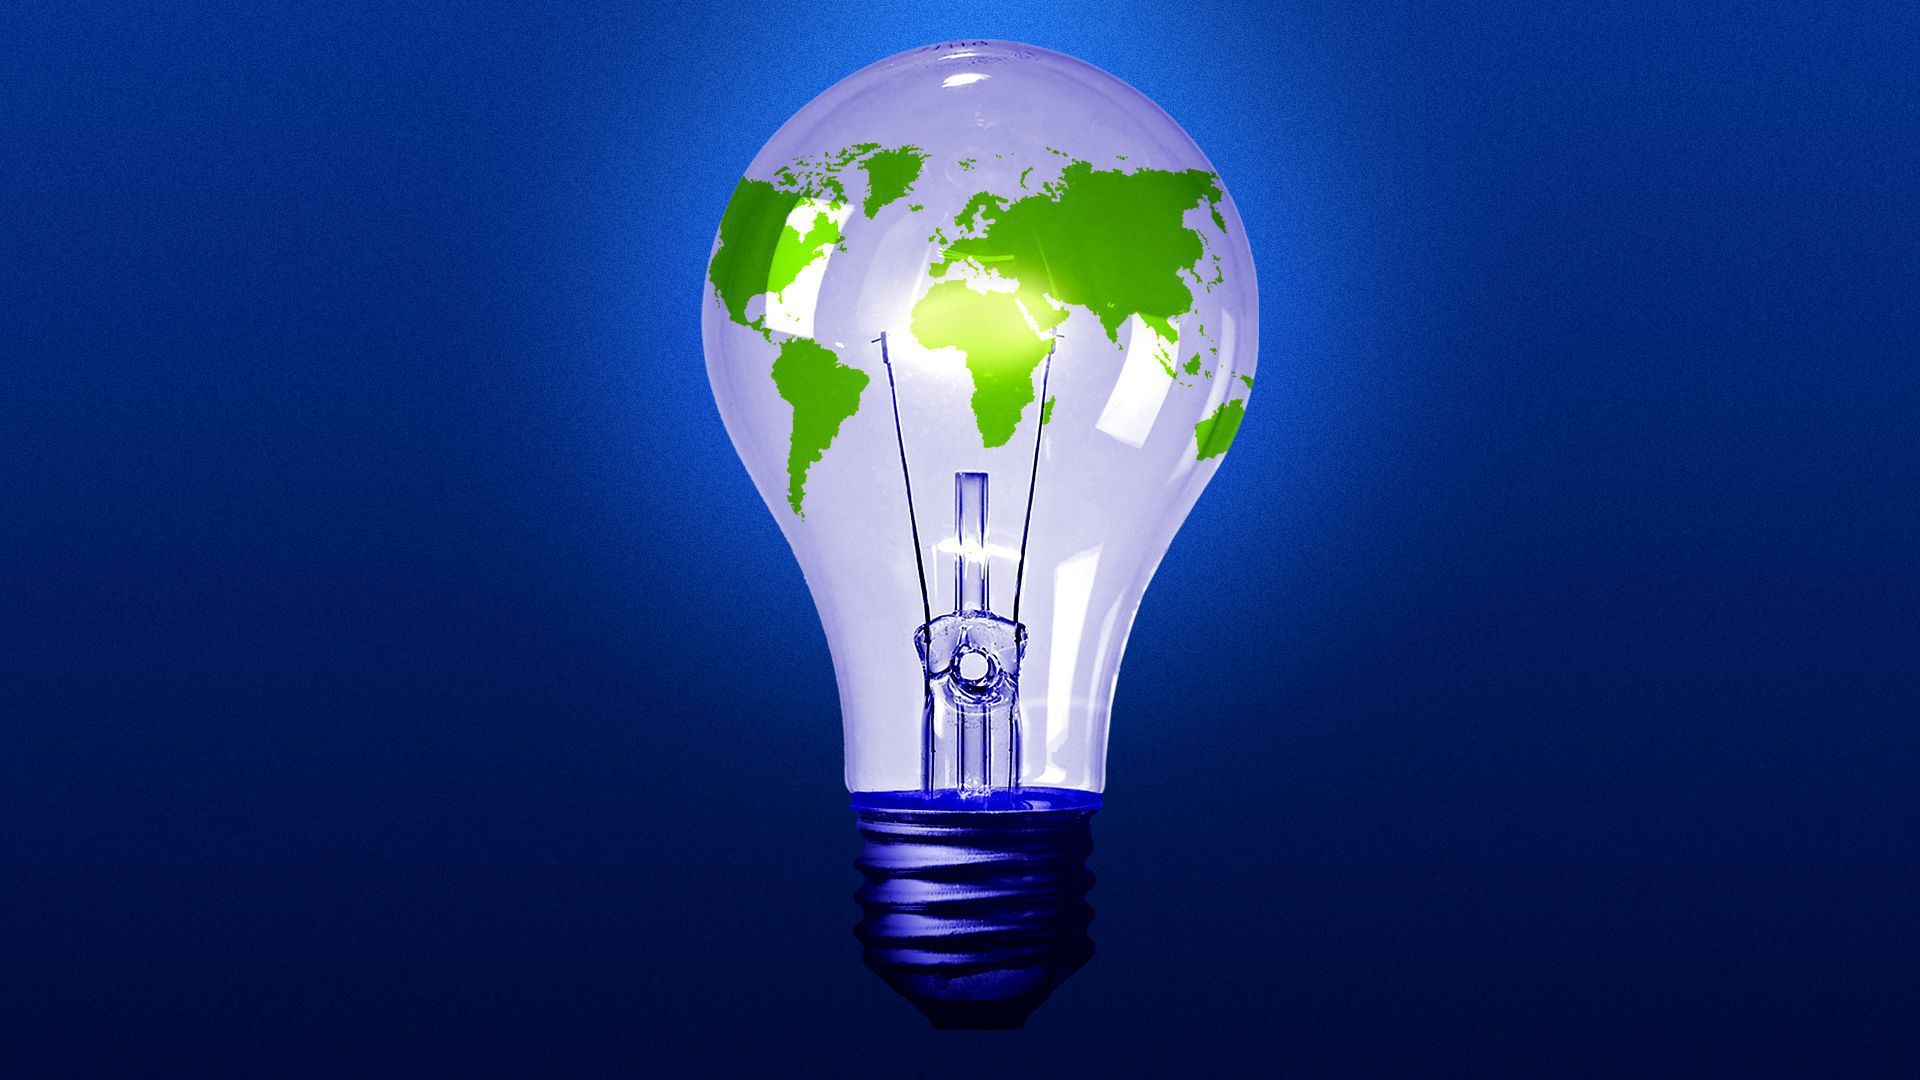 Illustration of a light bulb with a map of the world on it. 